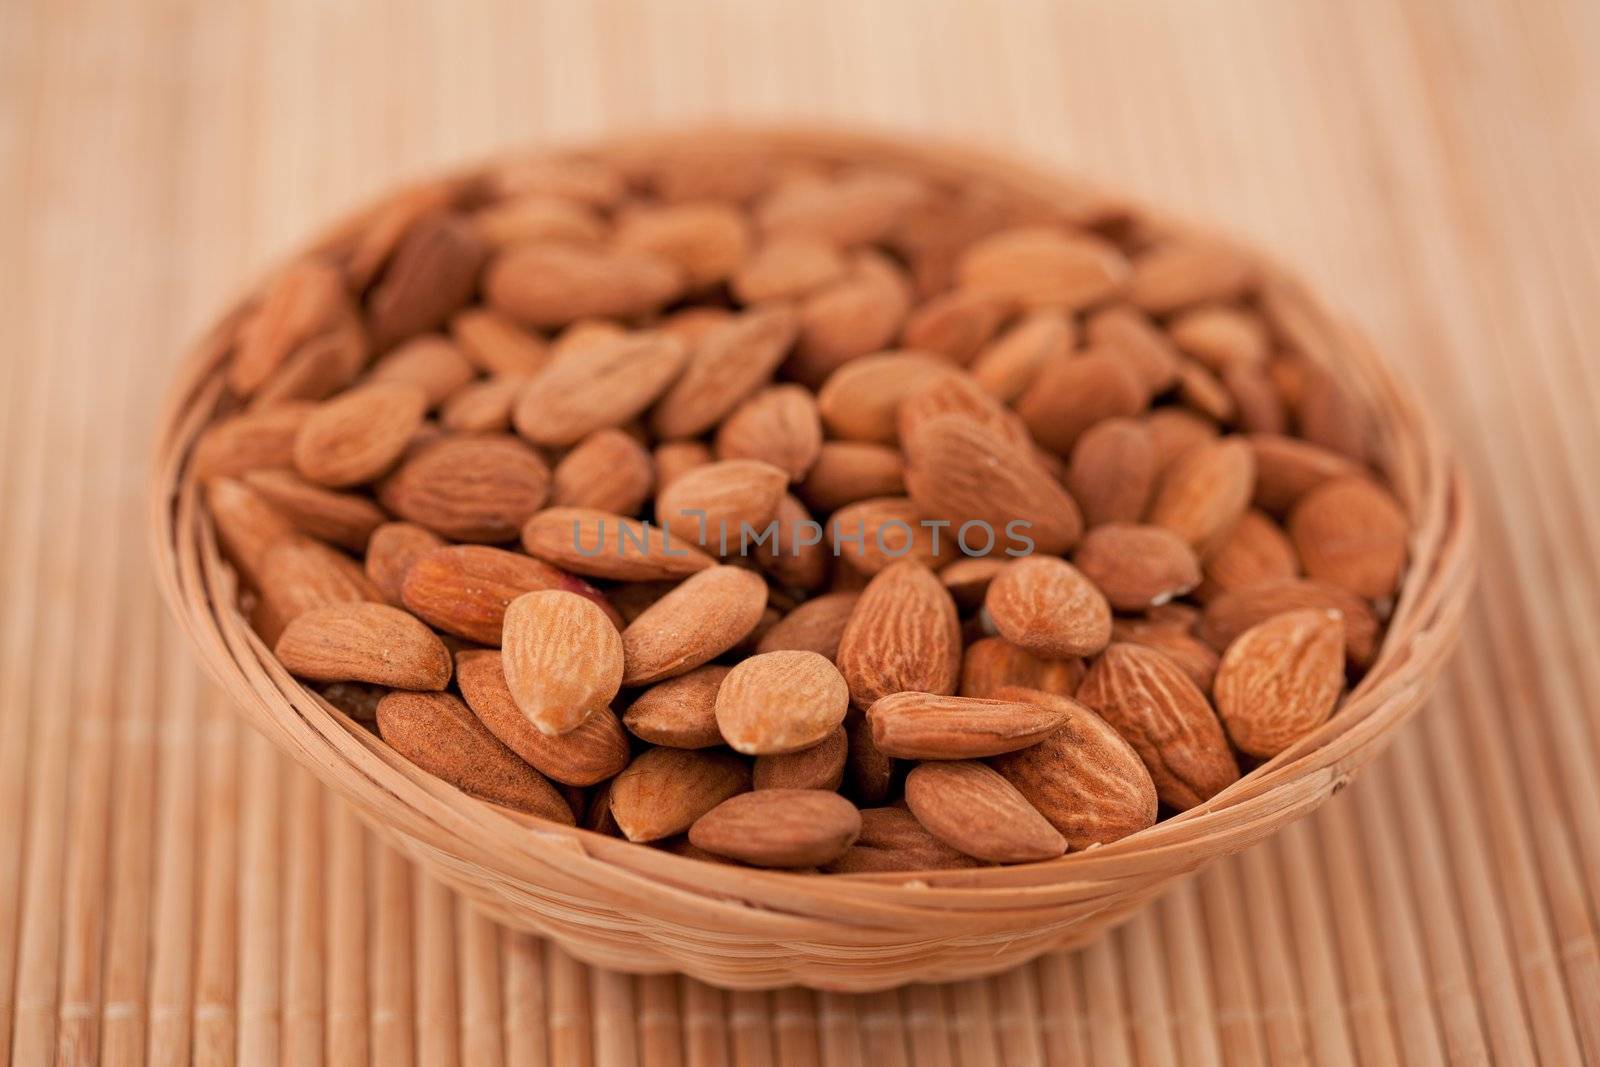 Bowl full of roasted almonds on a wooden placemat